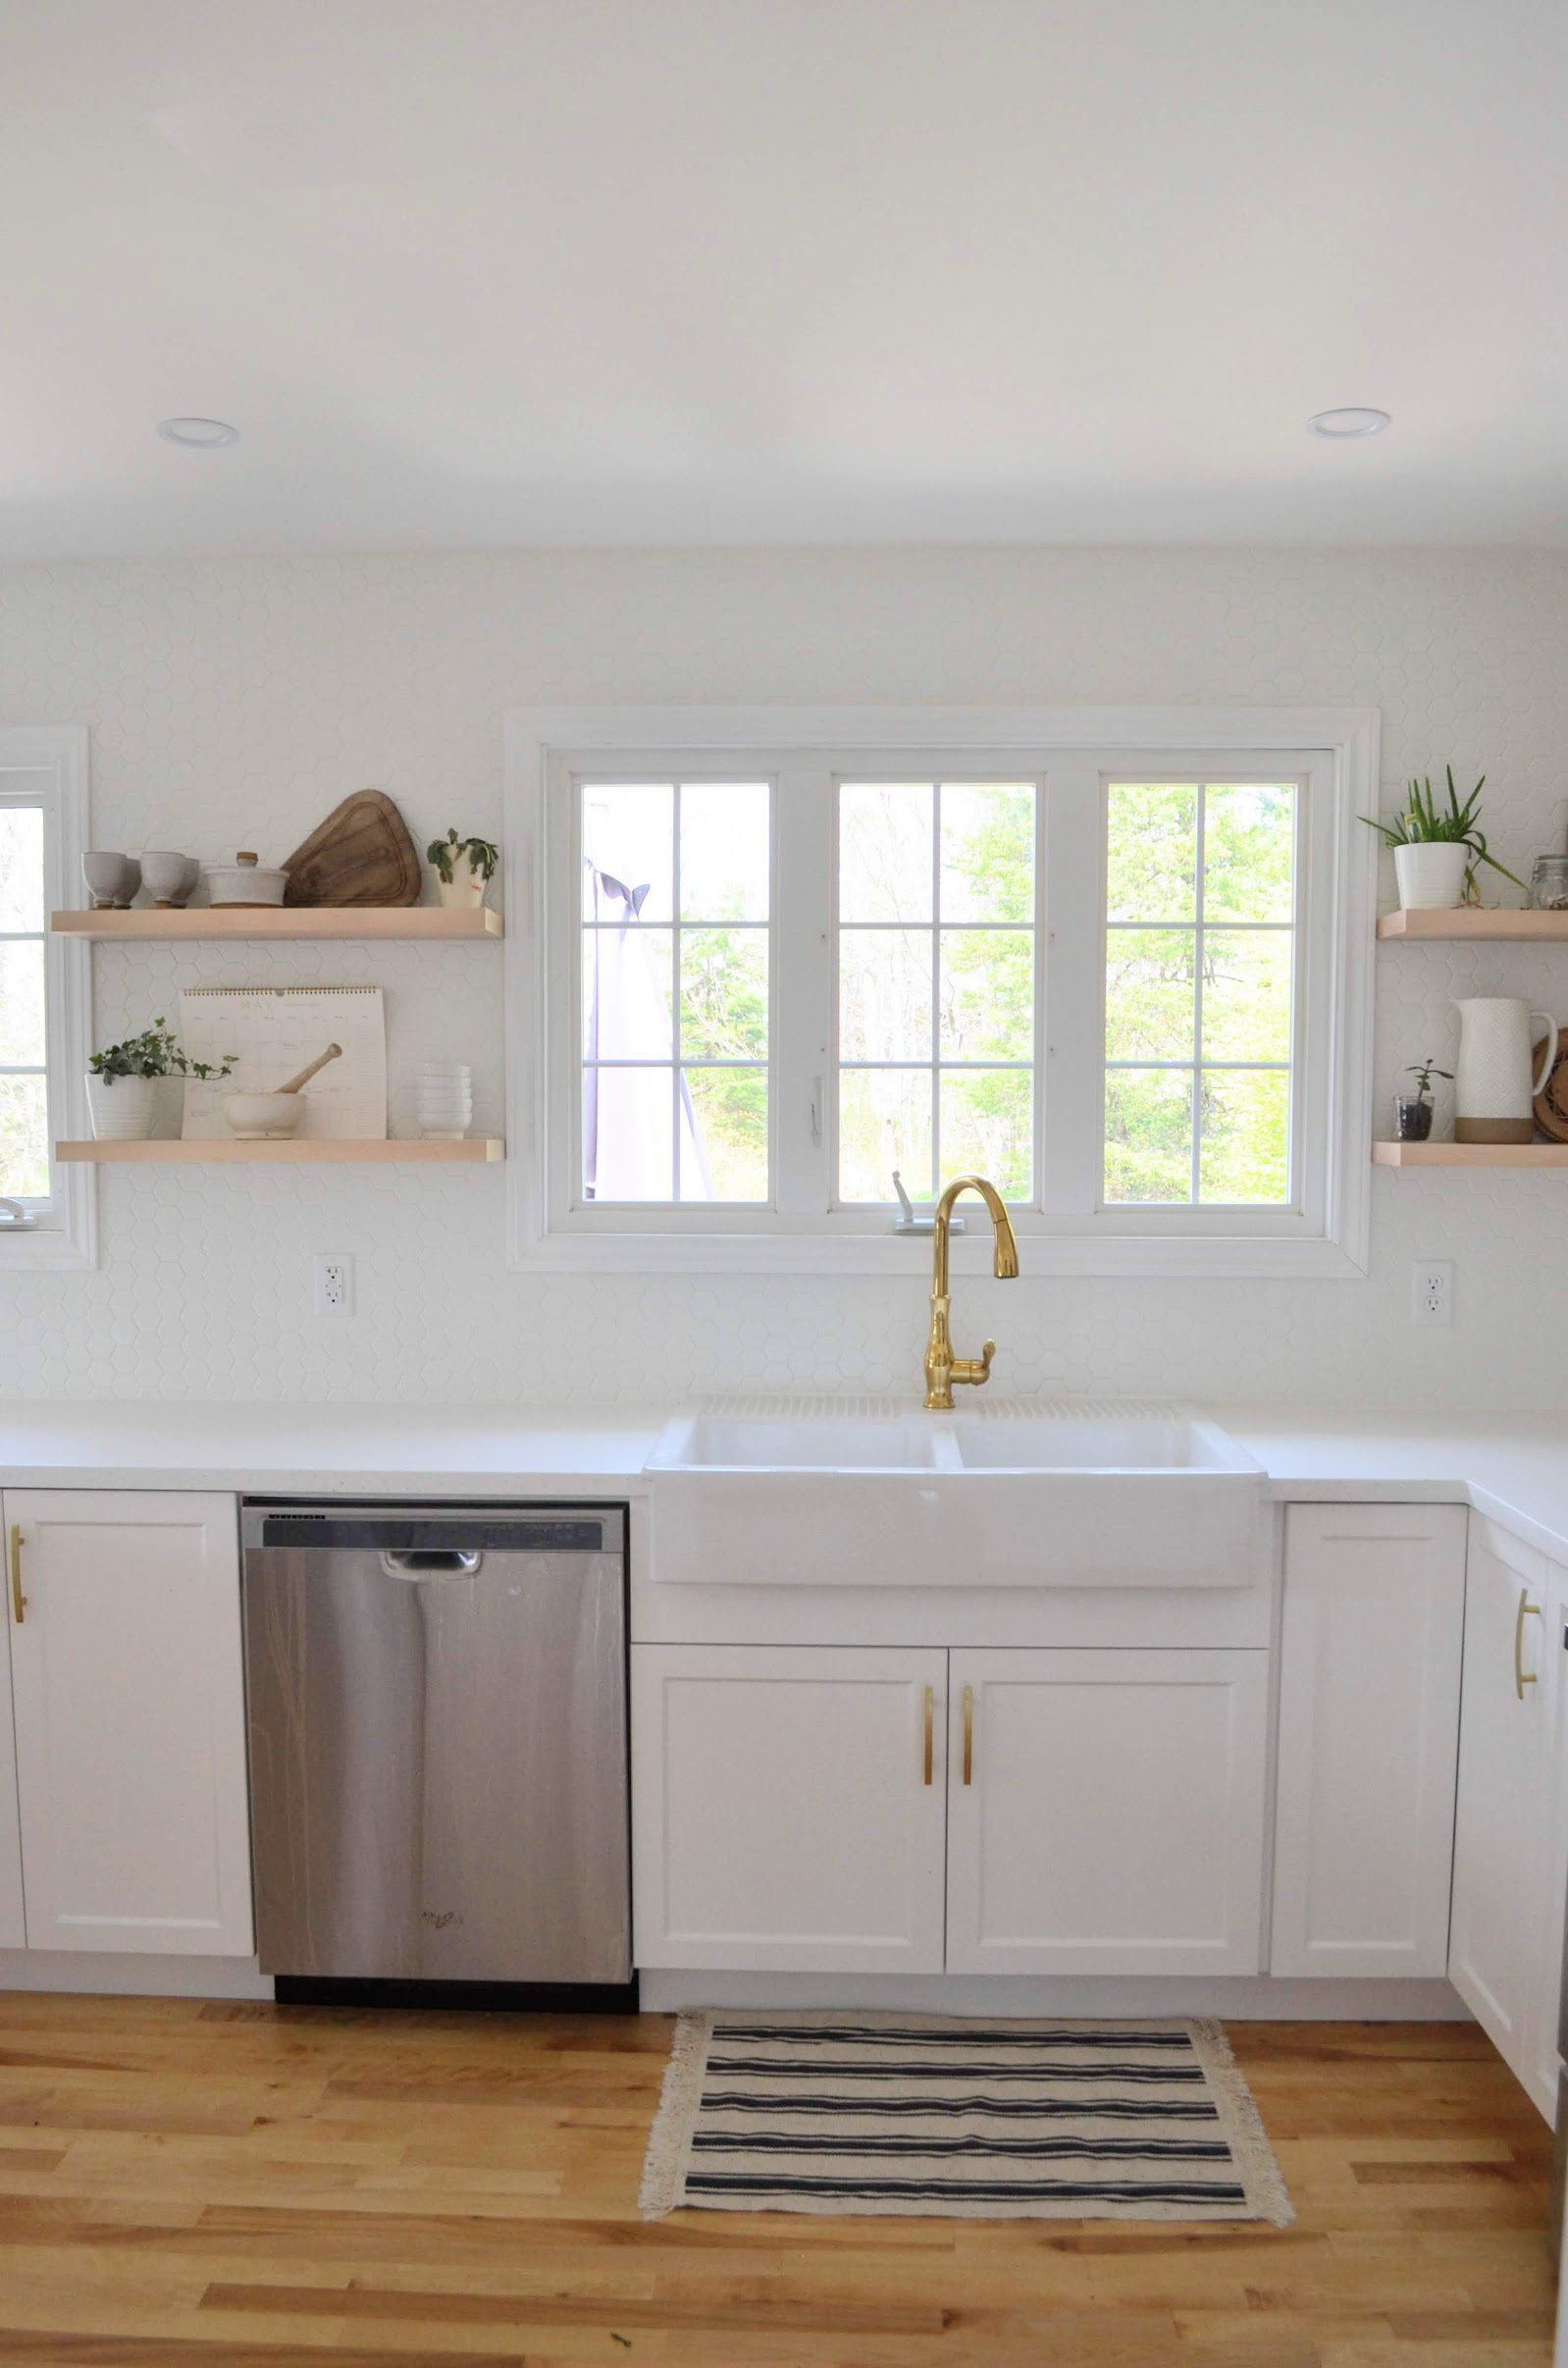 All white: Quartz counters, apron sink and doors